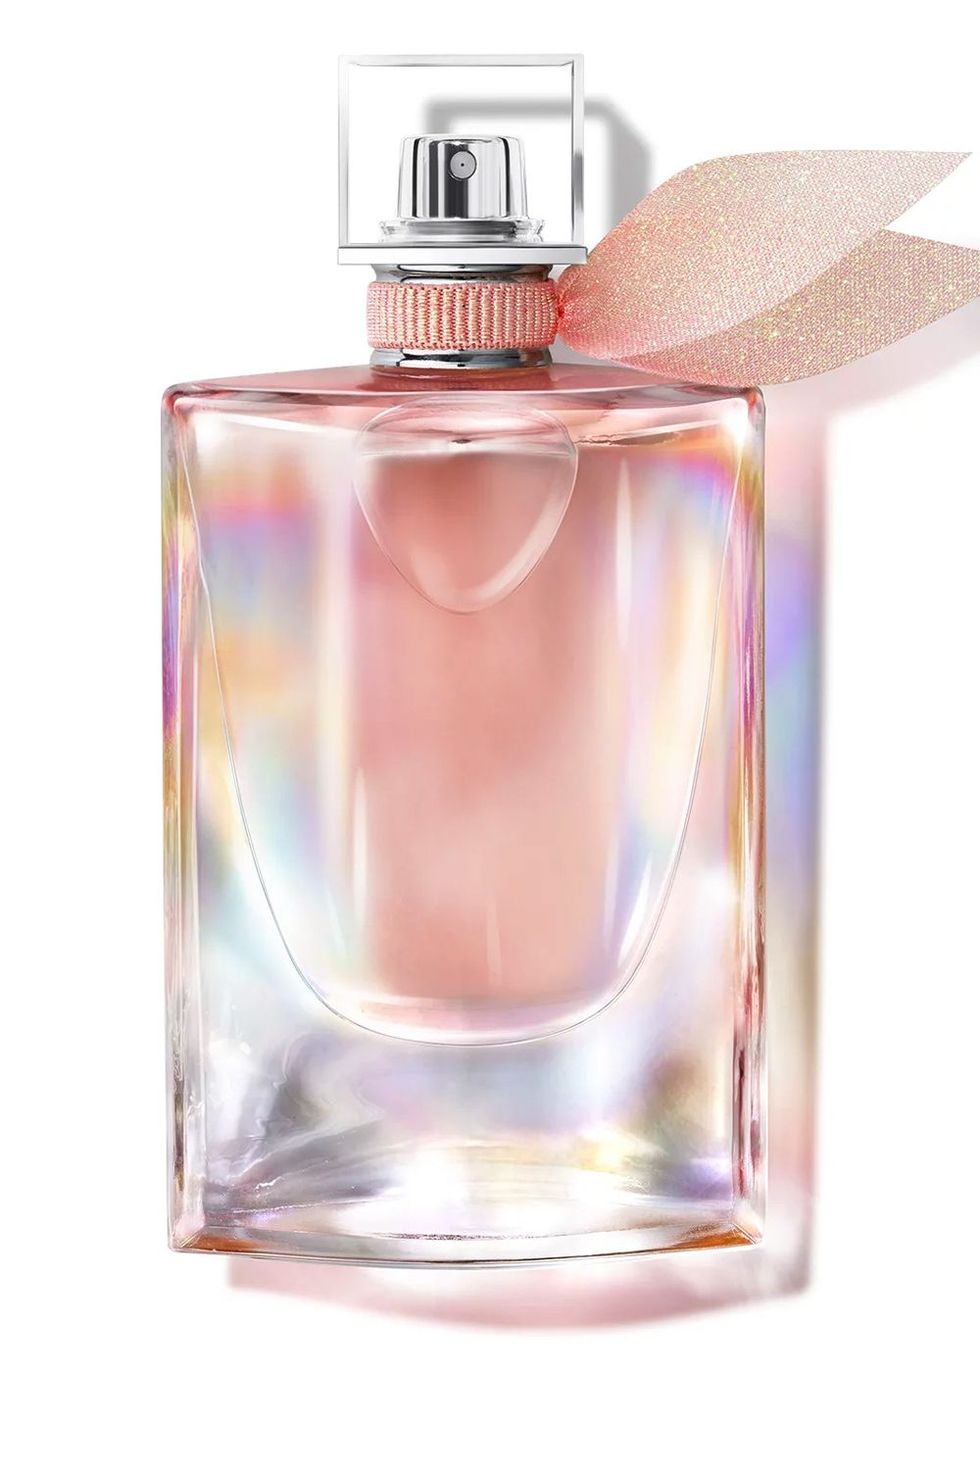 Summer Perfume Guide: The Best Summer Perfumes To Try